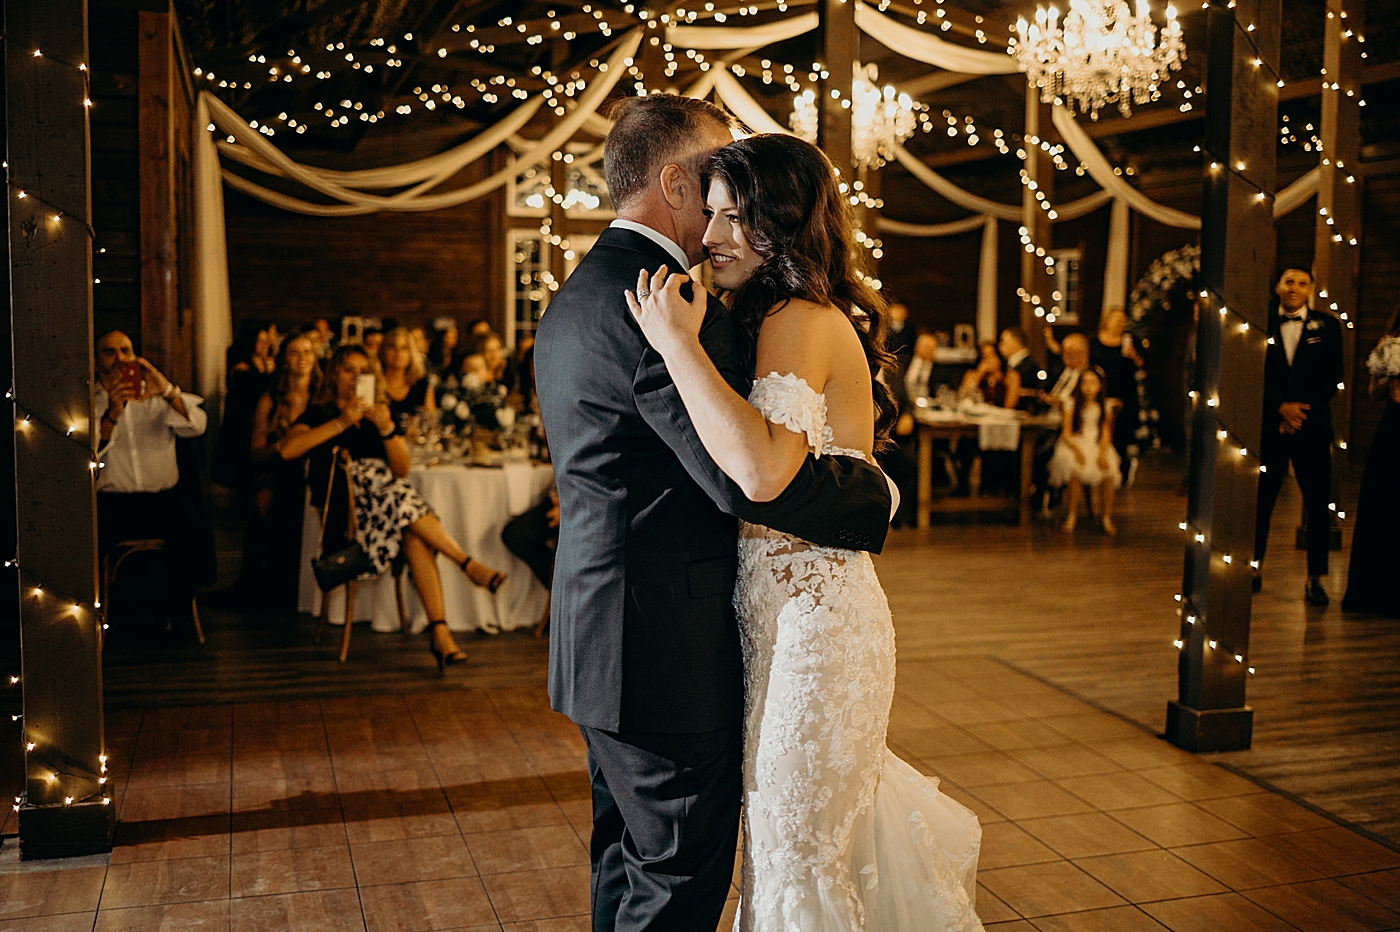 Father daughter dance Reception Ever After Farms Wedding Photography captured by South Florida Wedding Photographer Maggie Alvarez Photography